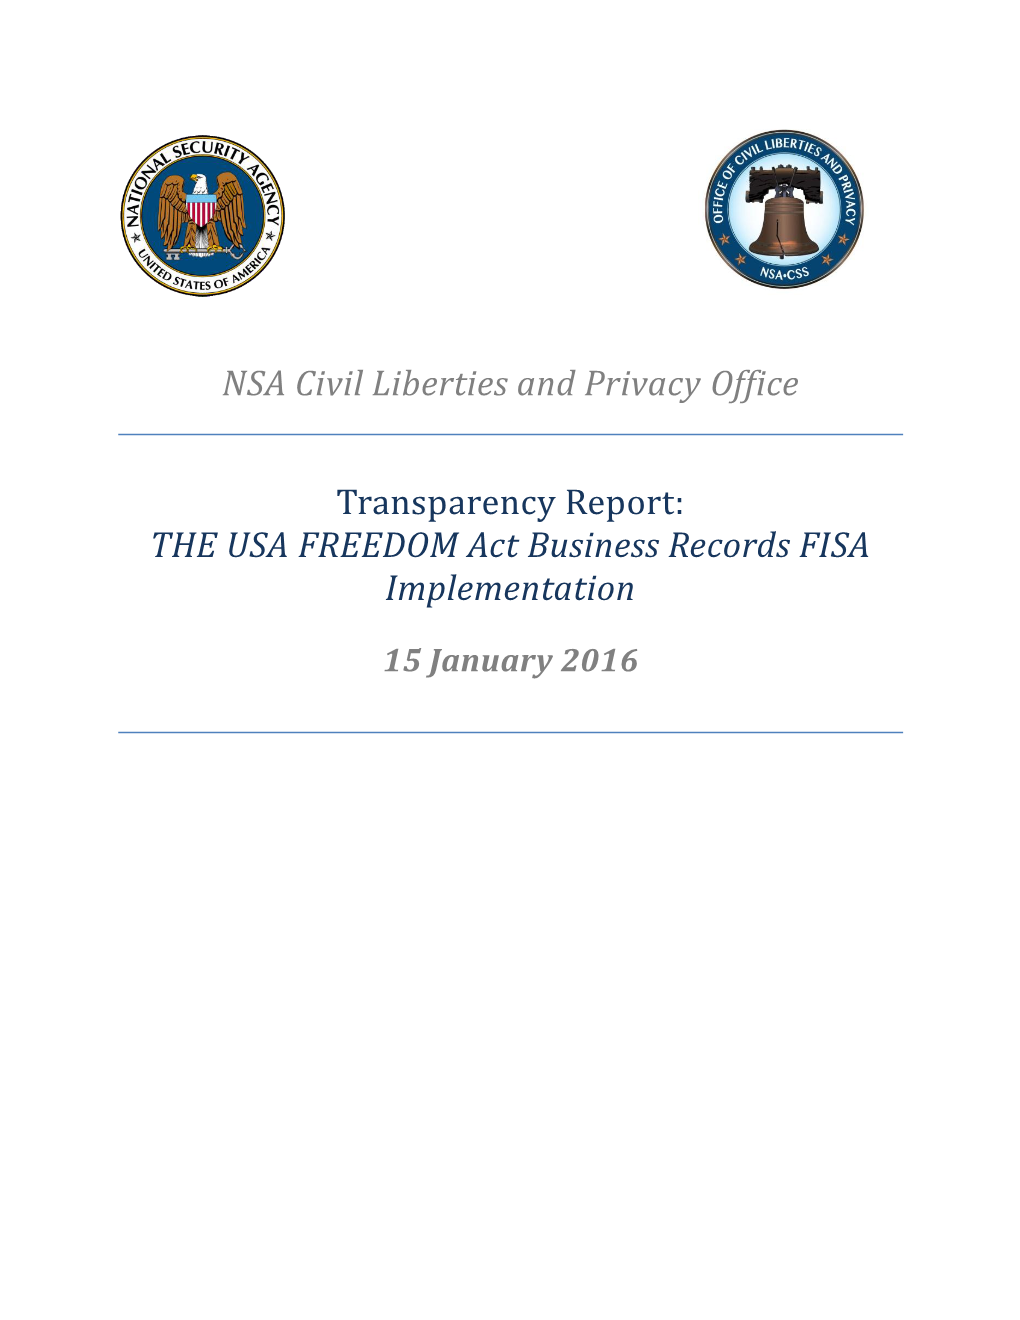 NSA Civil Liberties and Privacy Office Transparency Report